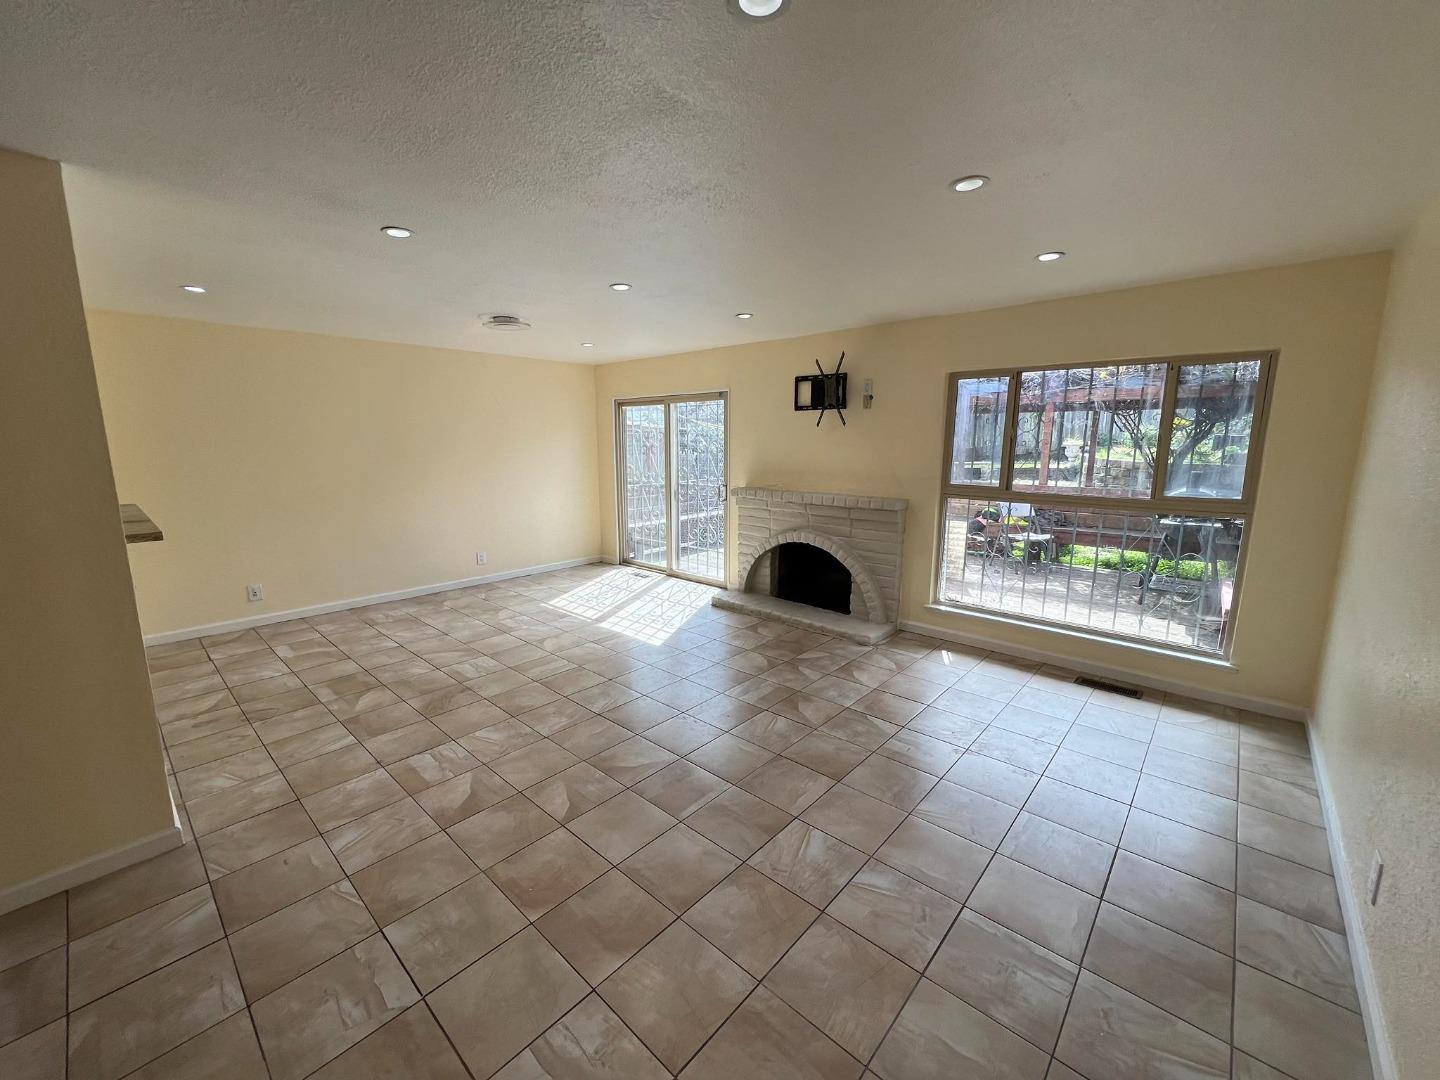 an empty room with windows and fireplace